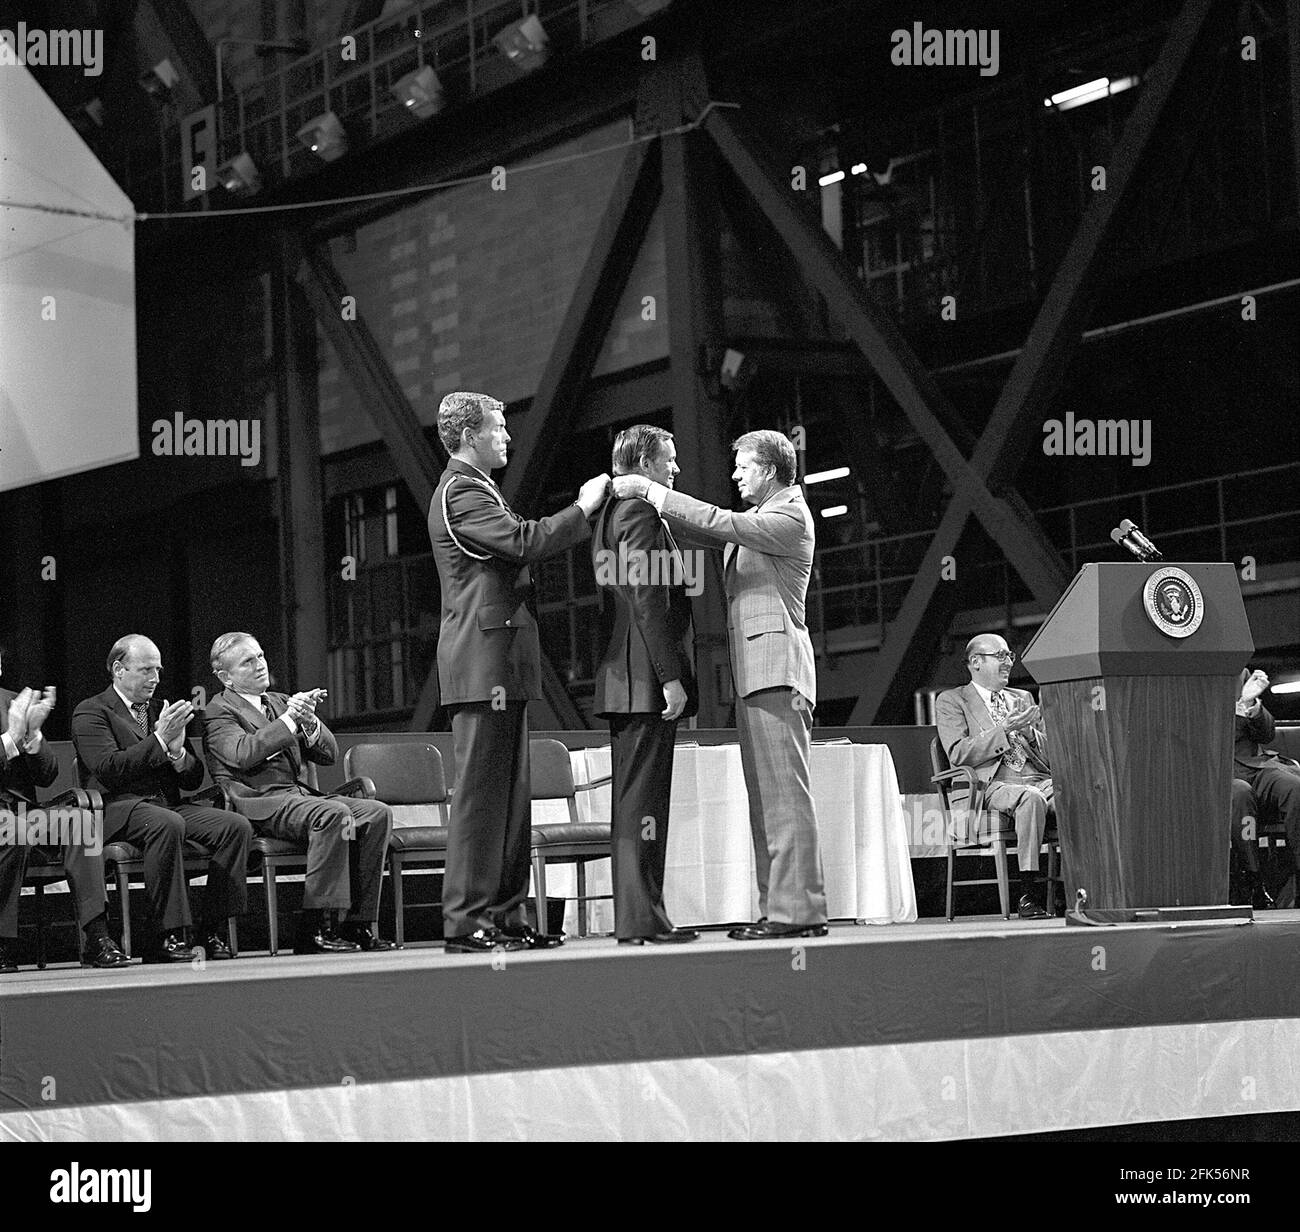 Cape Canaveral, FL - (FILE) -- Astronaut Neil A. Armstrong receives the first Congressional Space Medal of Honor from United States President Jimmy Carter, assisted by Captain Robert Peterson on October 1, 1978. Armstrong, one of six astronauts to be presented the medal during ceremonies held in the Vehicle Assembly Building (VAB), was awarded for his performance during the Gemini 8 mission and the Apollo 11 mission when he became the first human to set foot upon the Moon.Credit: NASA via CNP /MediaPunch Stock Photo